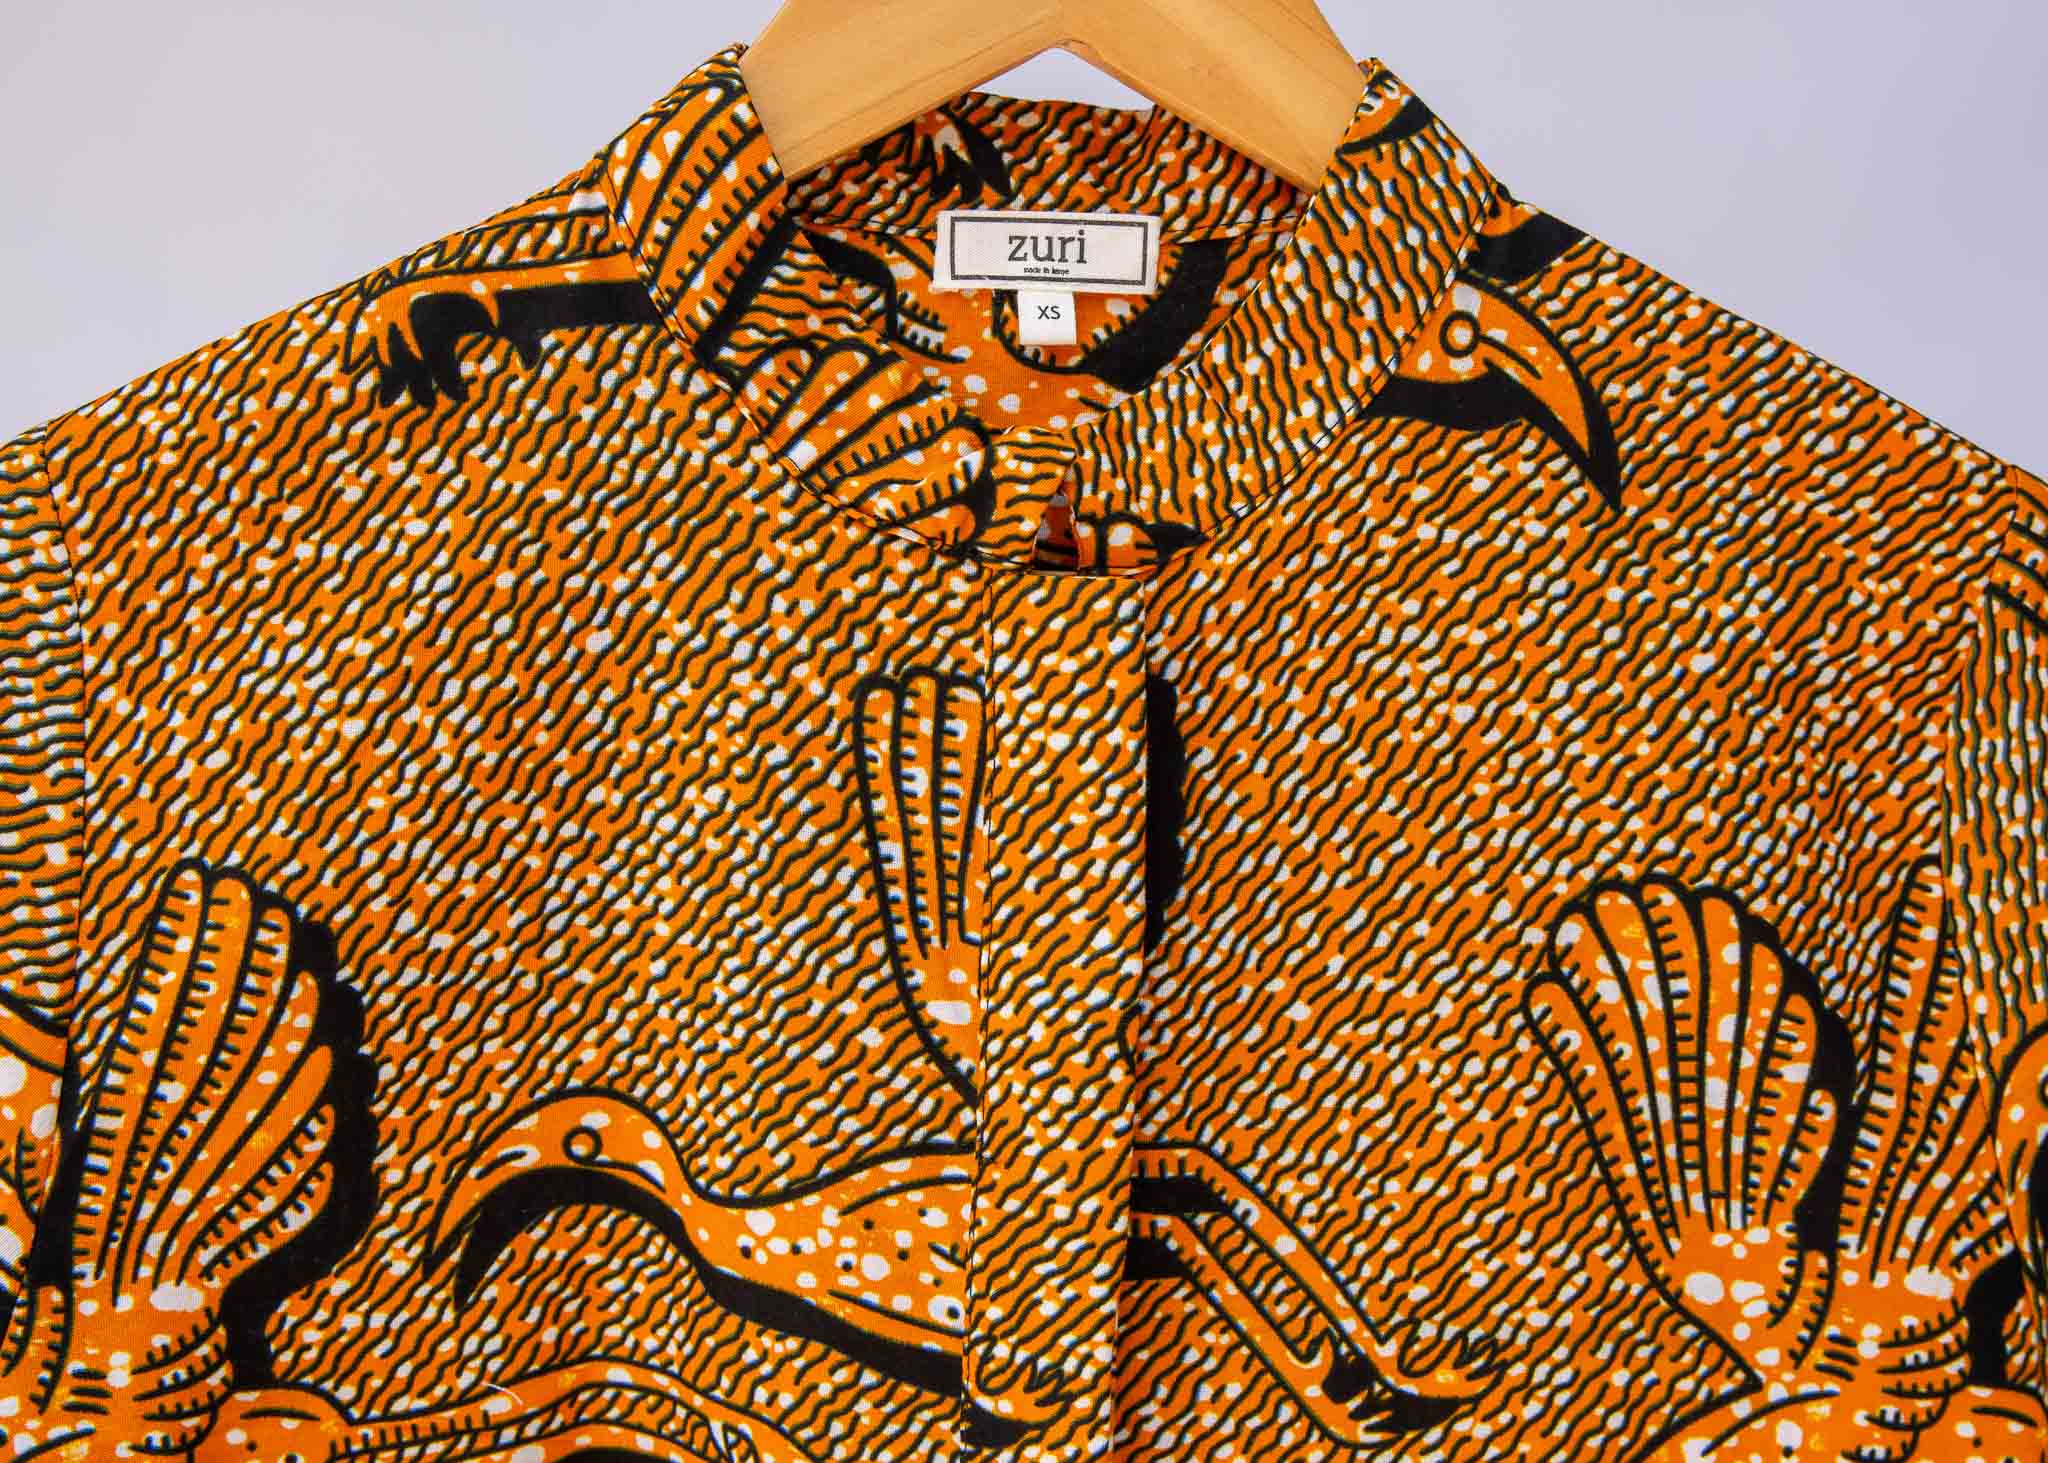 Display of golden yellow shirt with flying bird print.